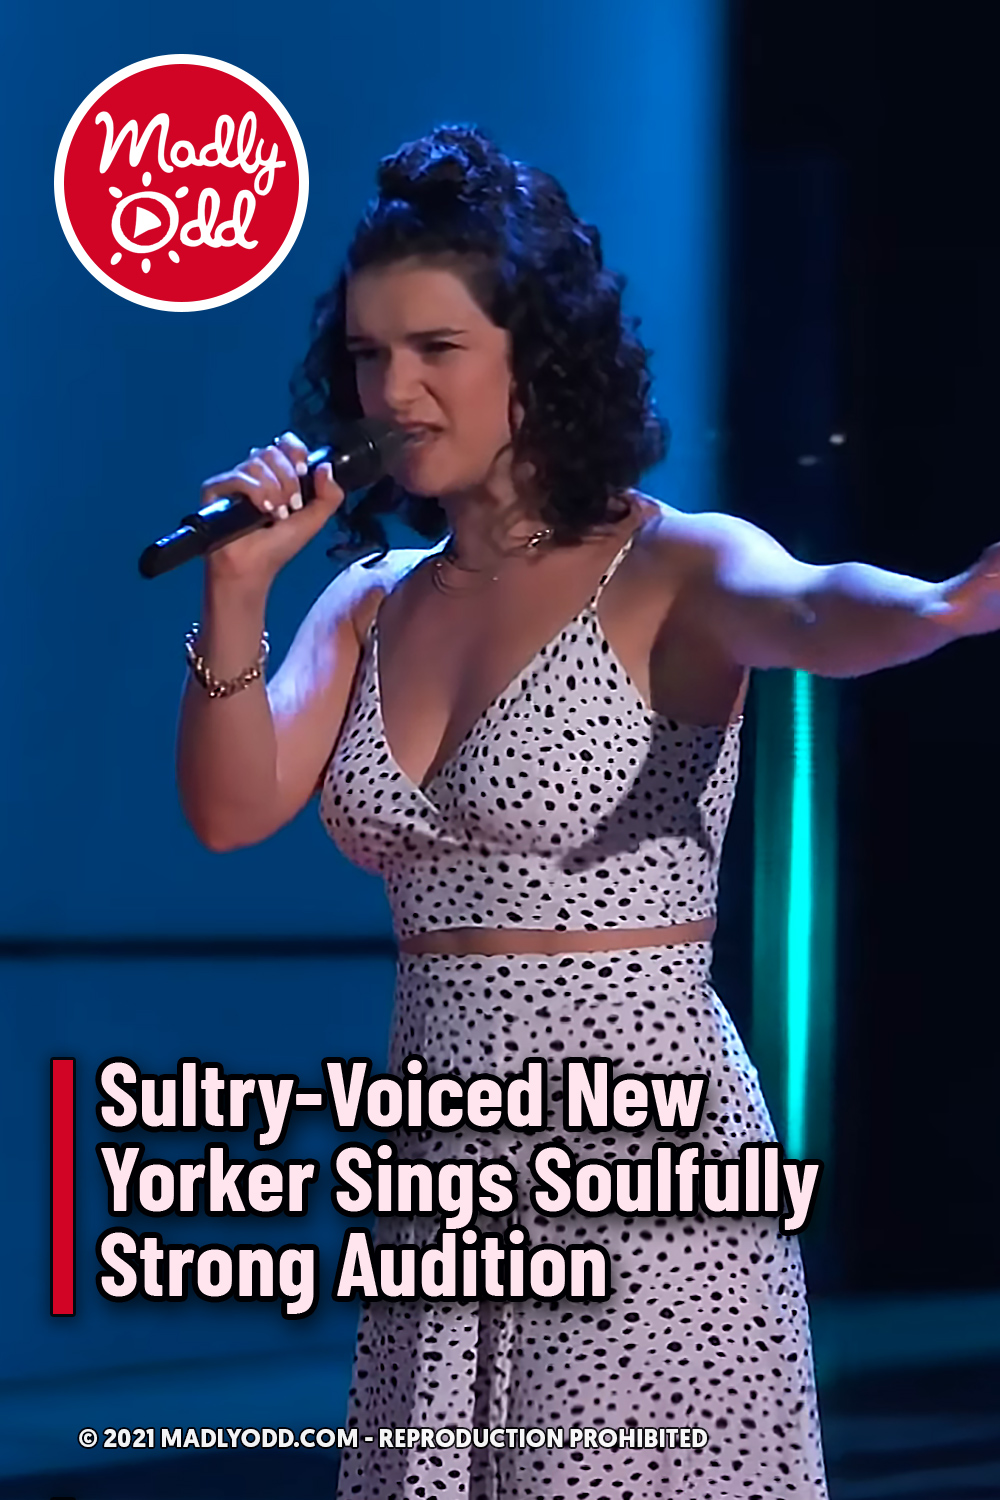 Sultry-Voiced New Yorker Sings Soulfully Strong Audition